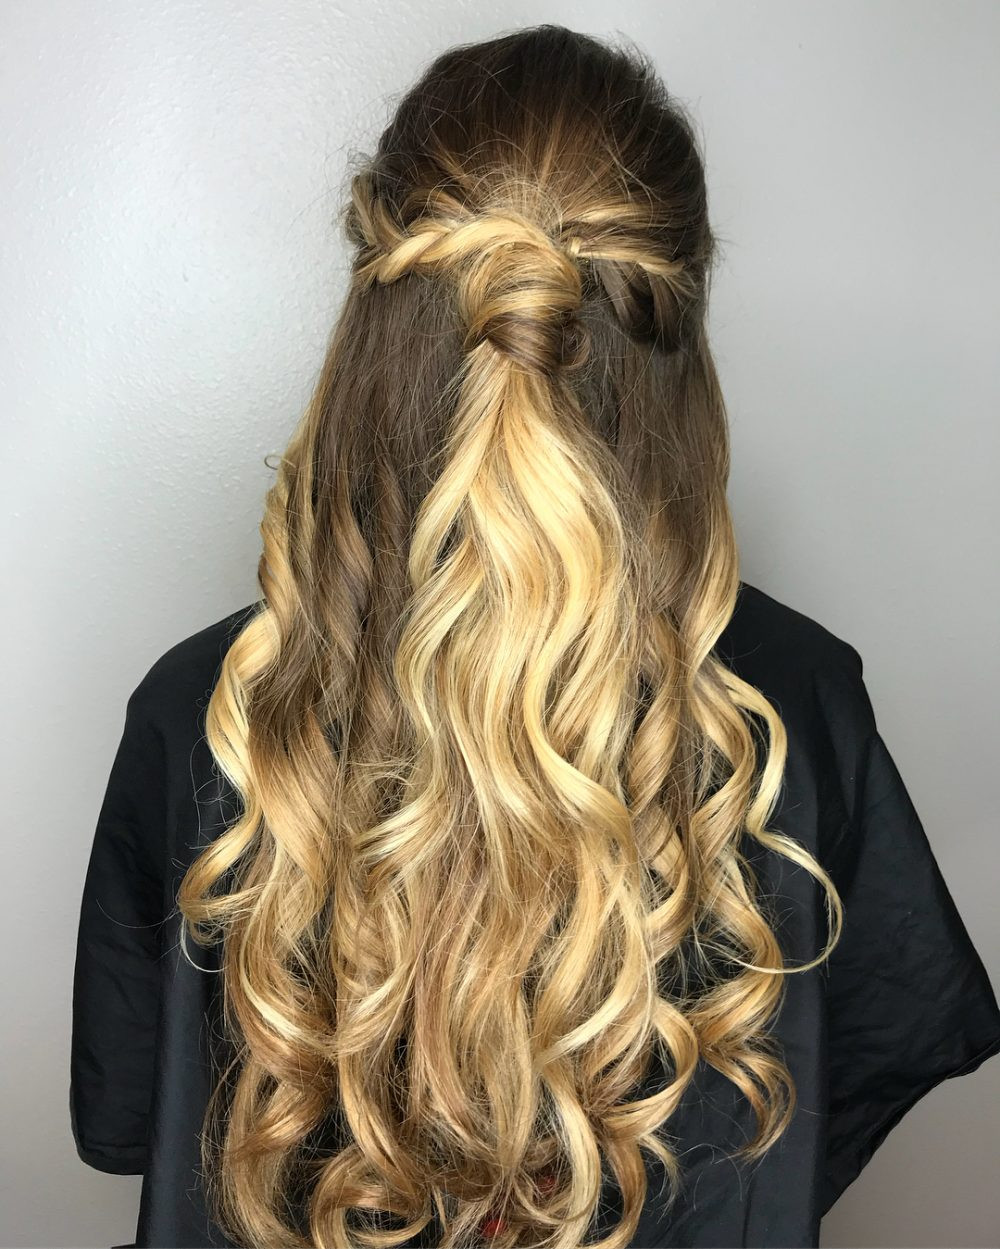 Elegant Prom Hairstyles
 29 Prom Hairstyles for Long Hair That Are Gorgeous